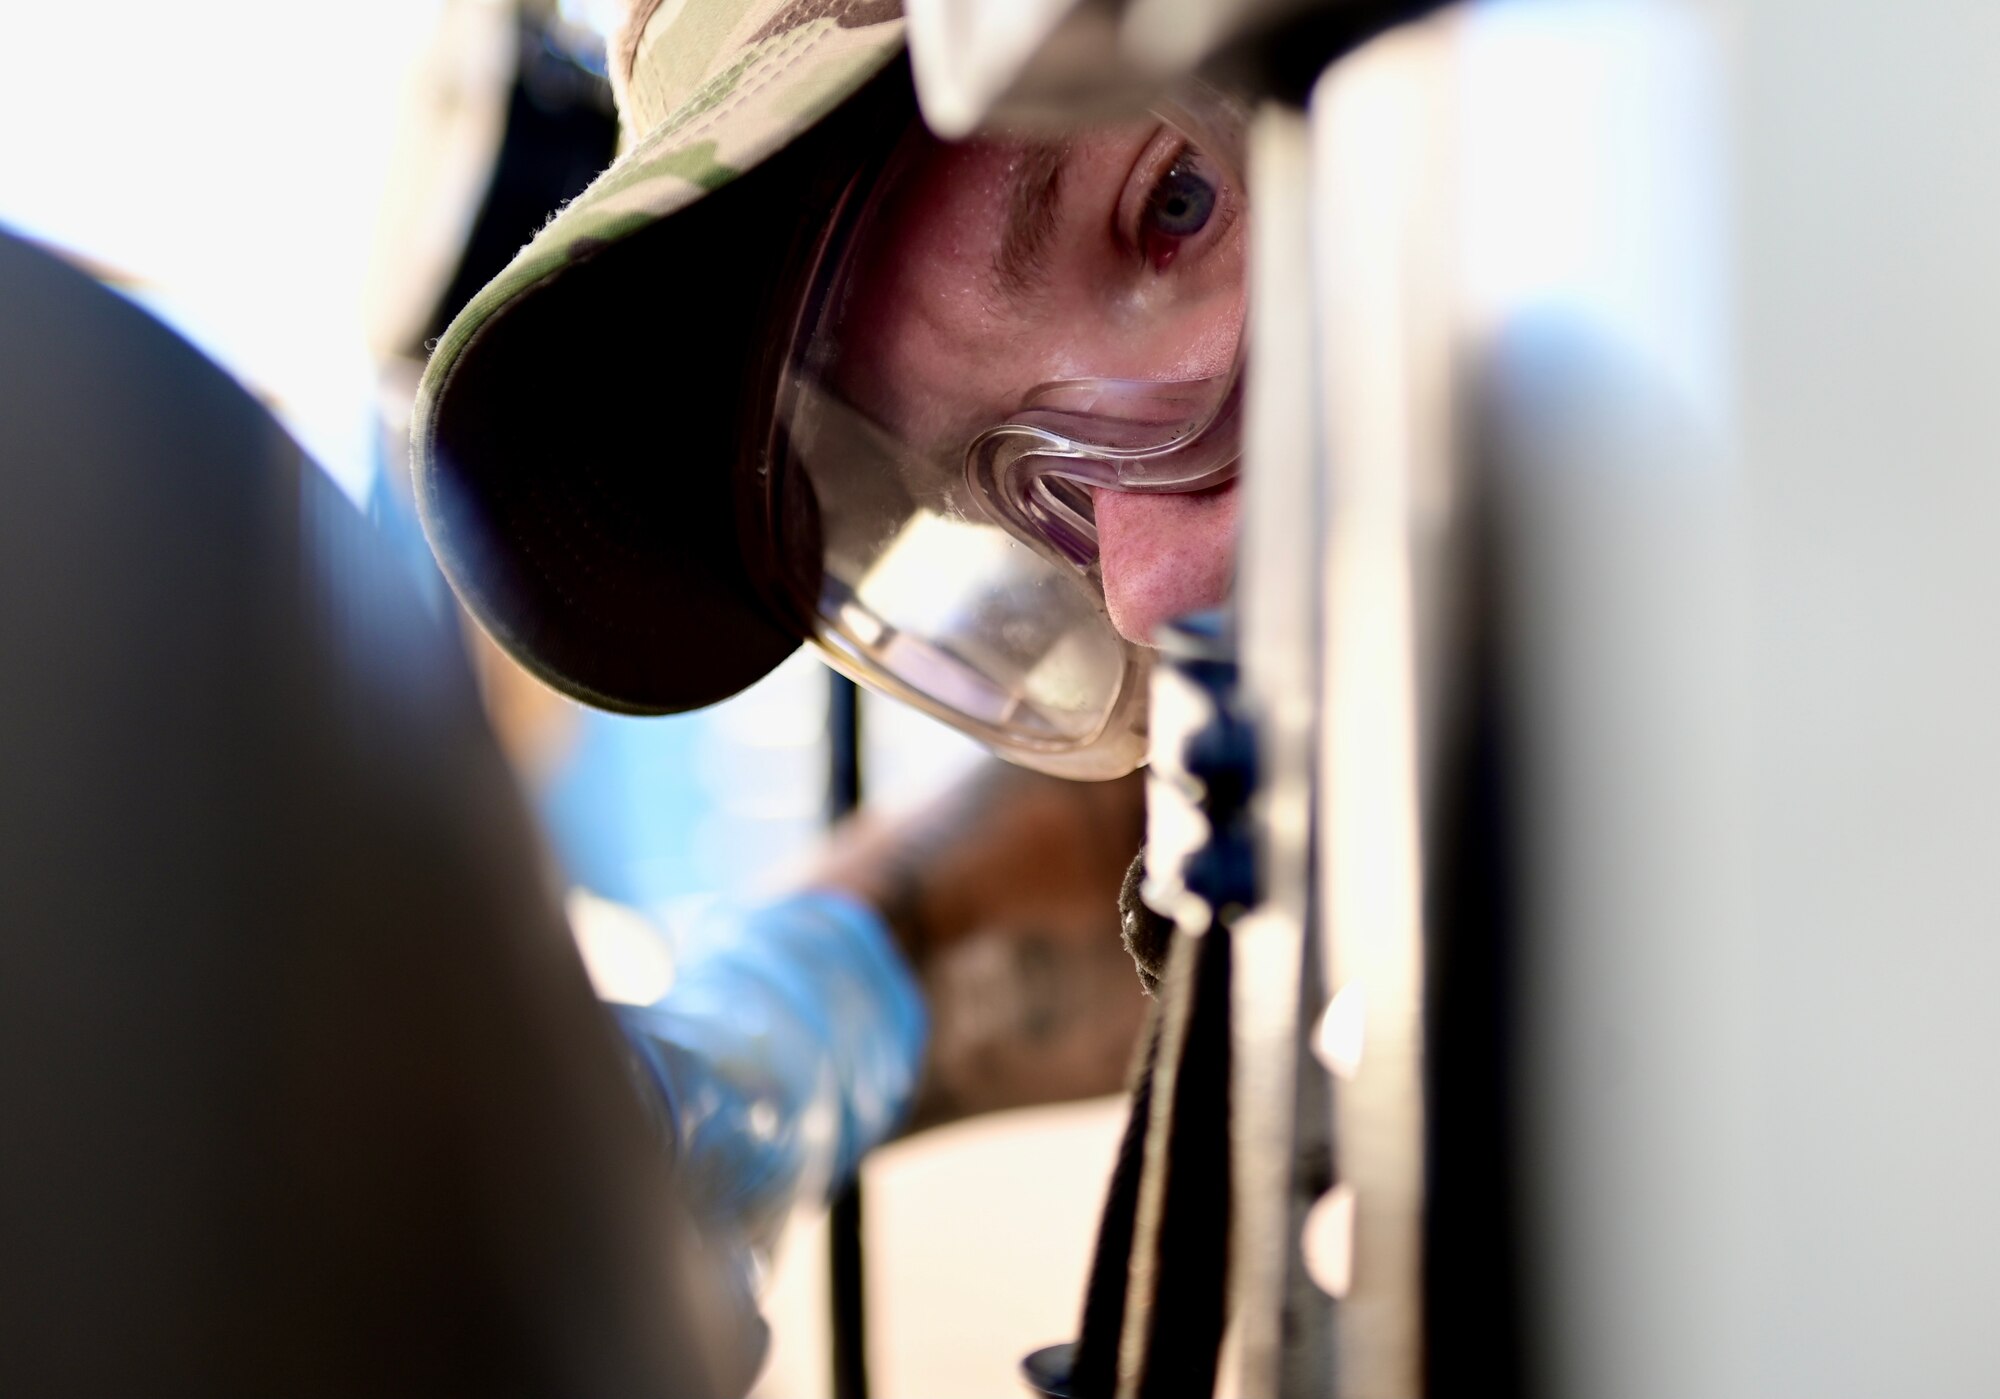 close up photo of an airman performing maintenance on an A-10 Thunderbolt II aircraft tire